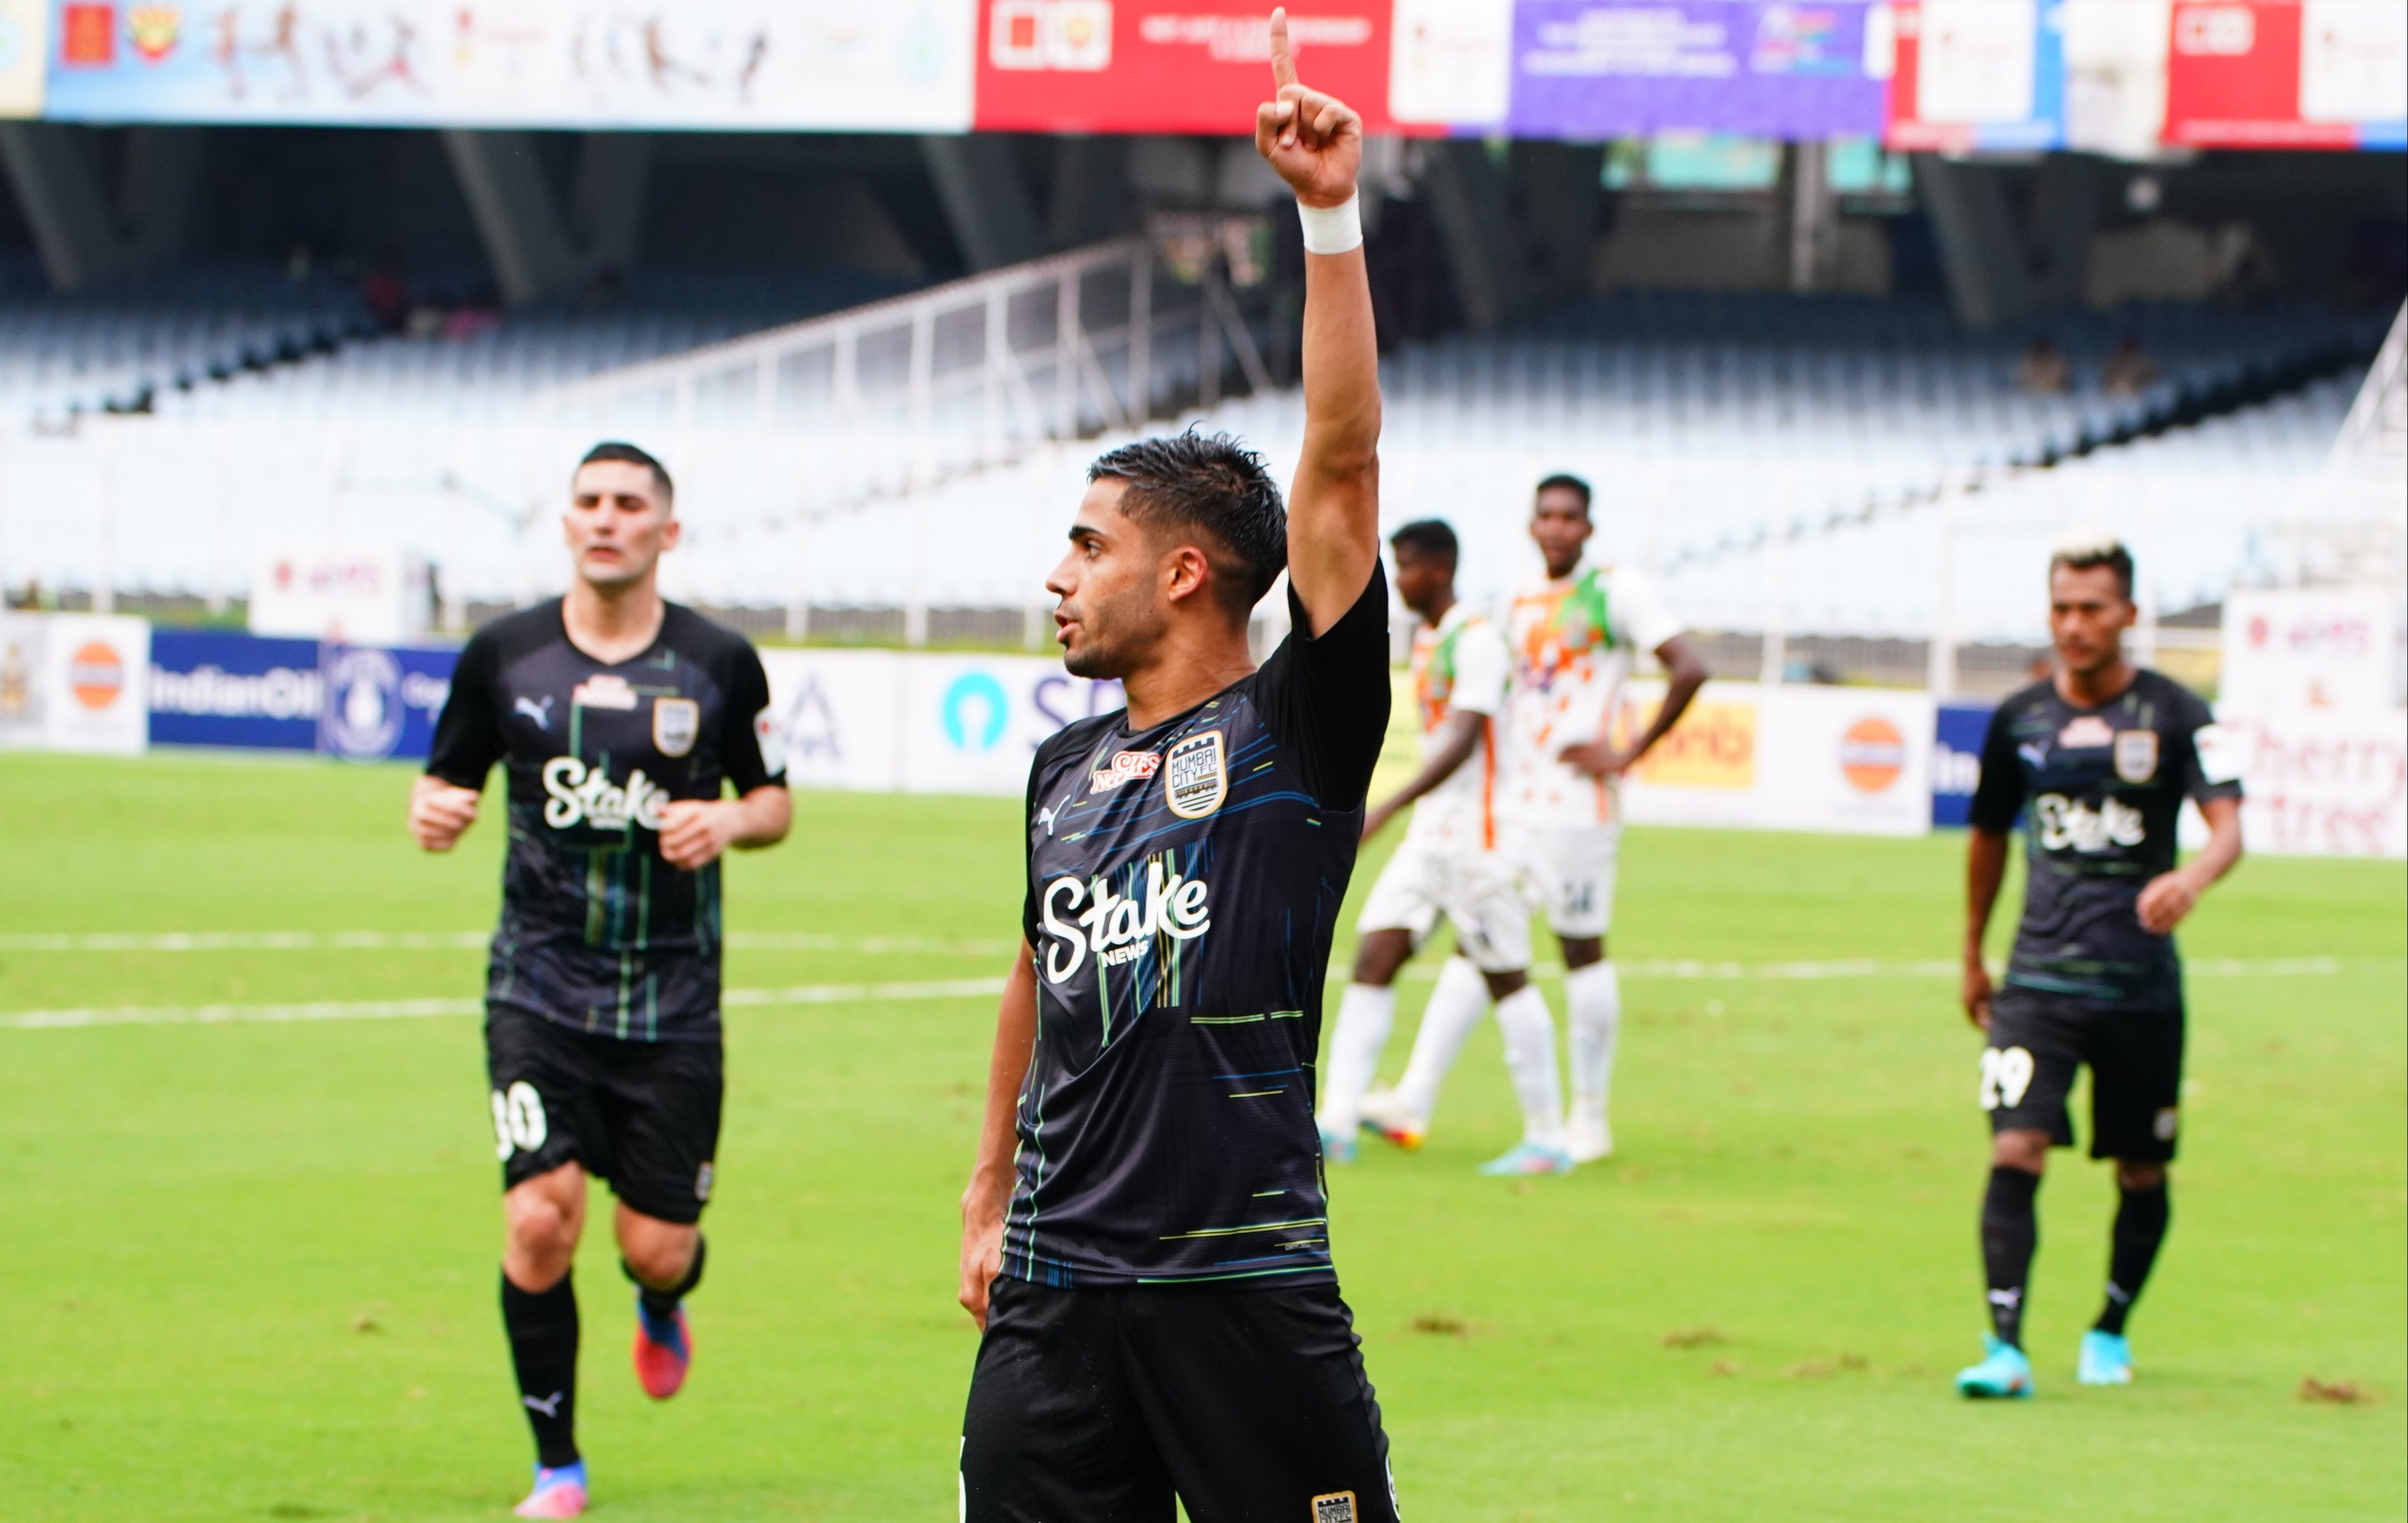 ISL 2022-23: From Greg Stewart to Vinit Rai, Five players who can help Des Buckingham reclaim lost status-Check Out